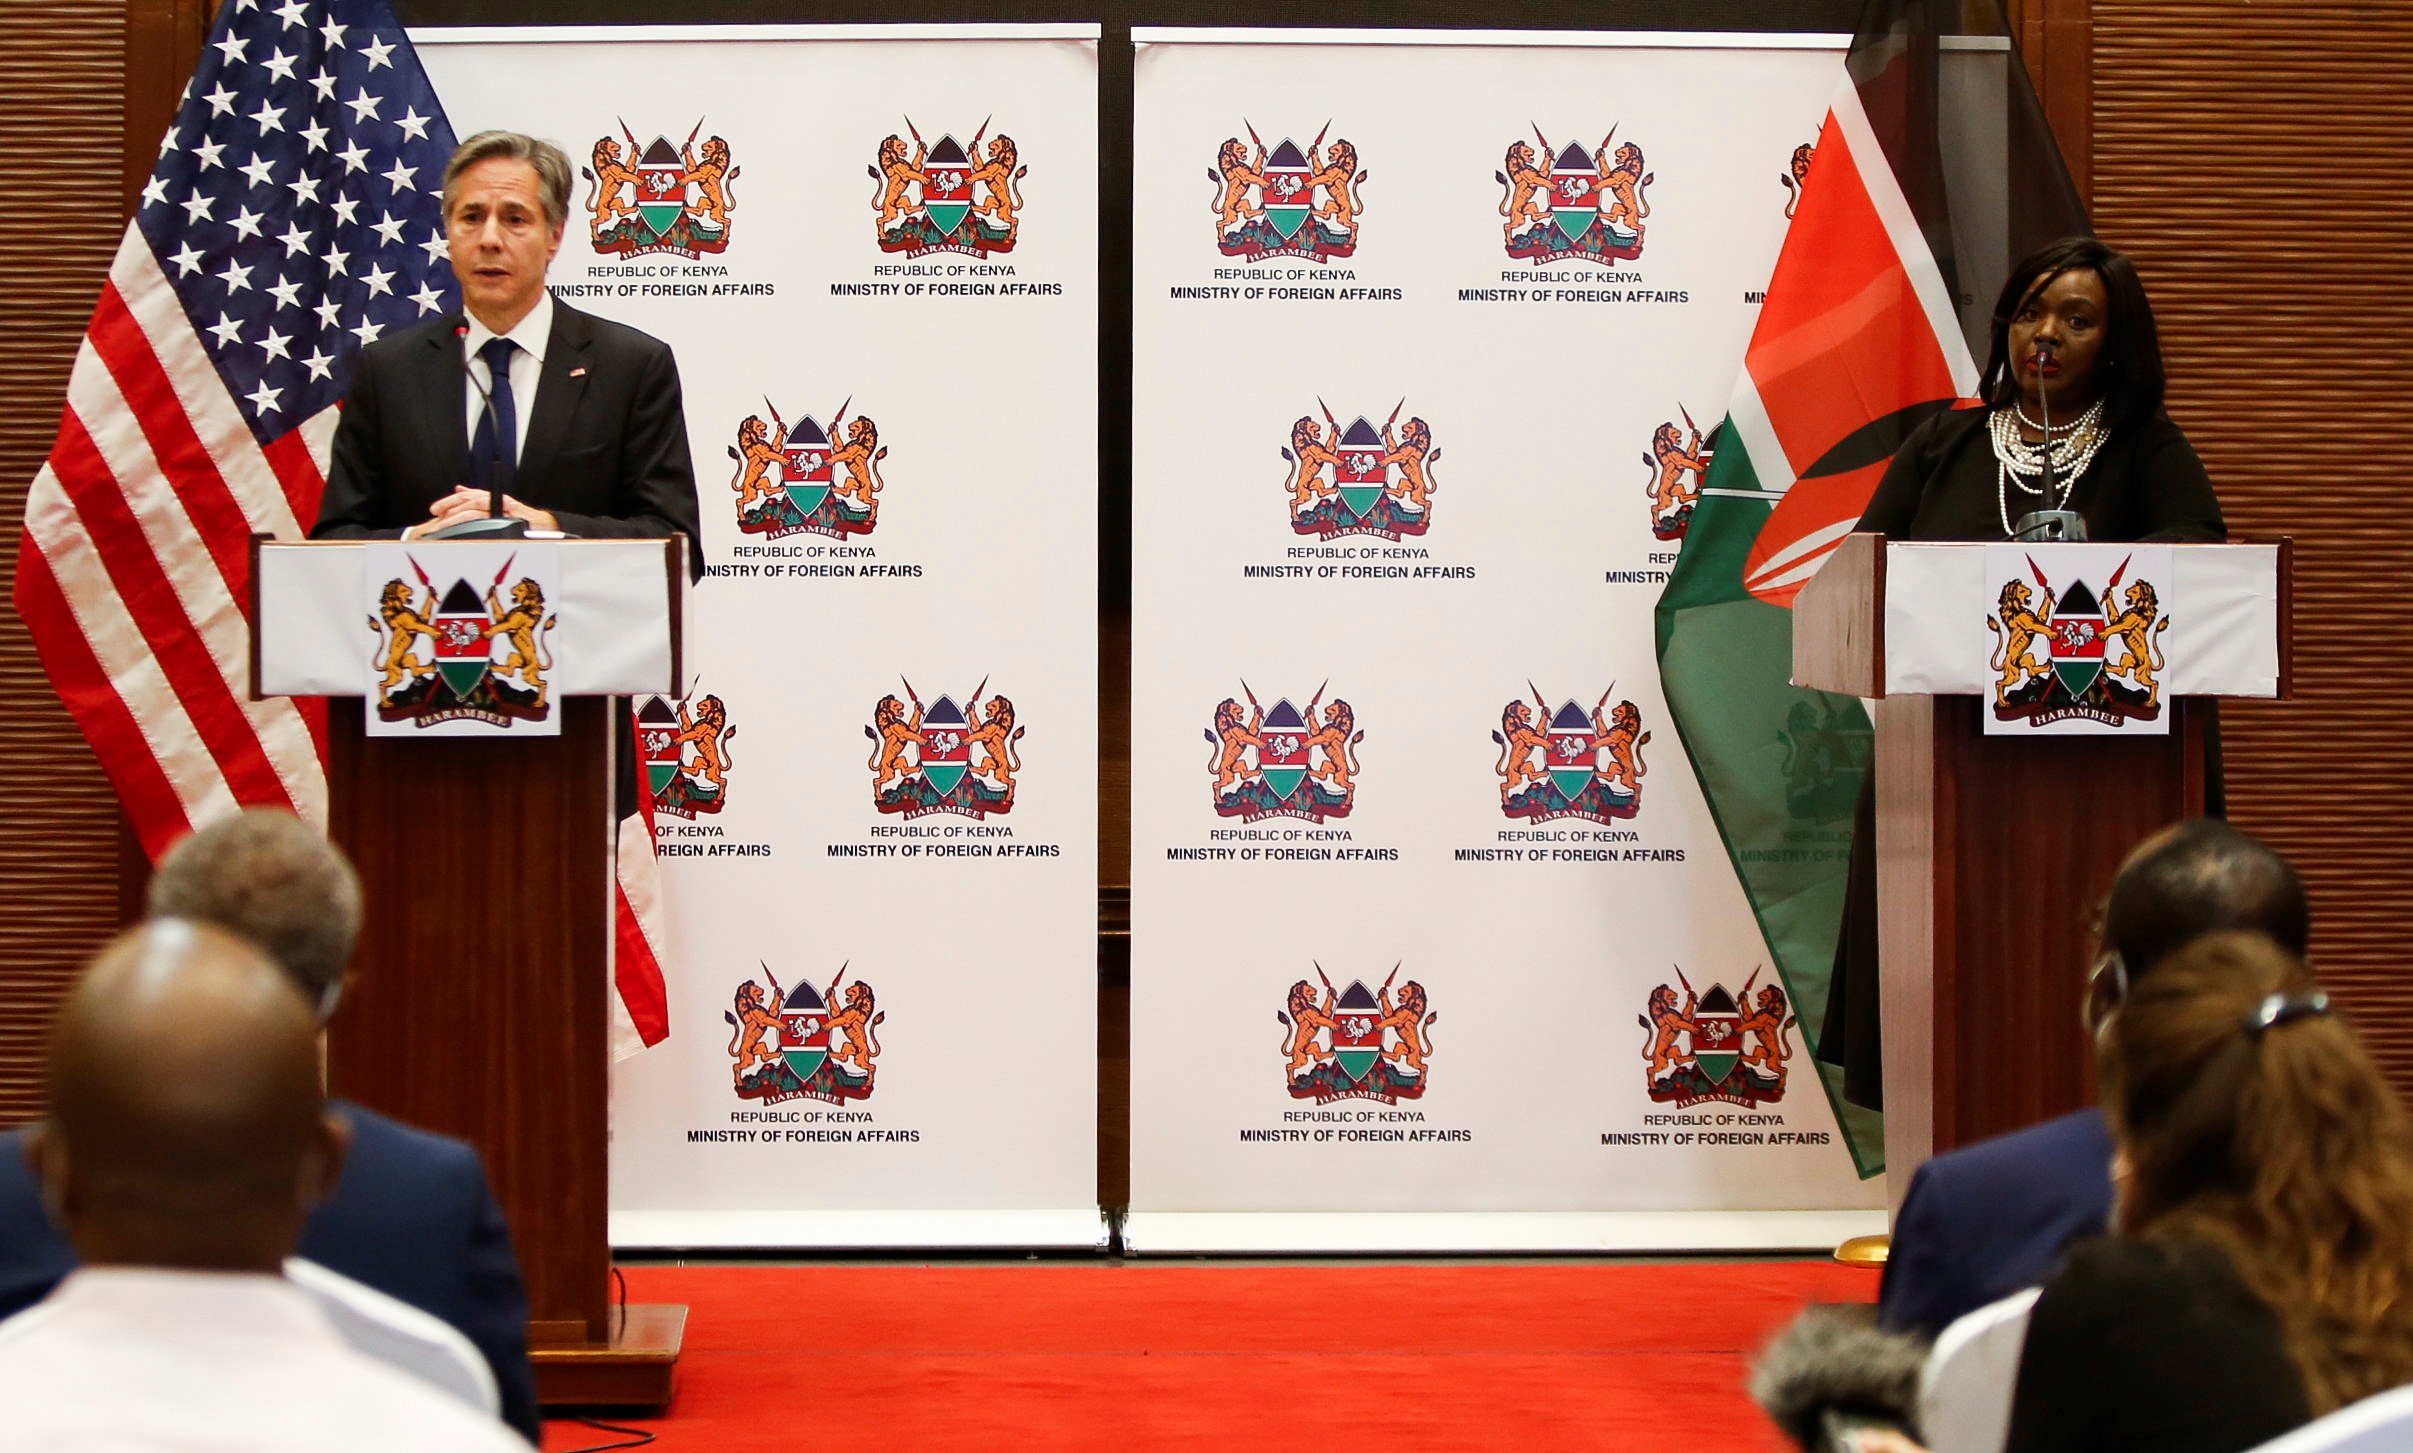 U.S. Secretary of State Antony Blinken and Kenya's Cabinet Secretary for Foreign Affairs Raychelle Omamo address a joint a news conference in Nairobi